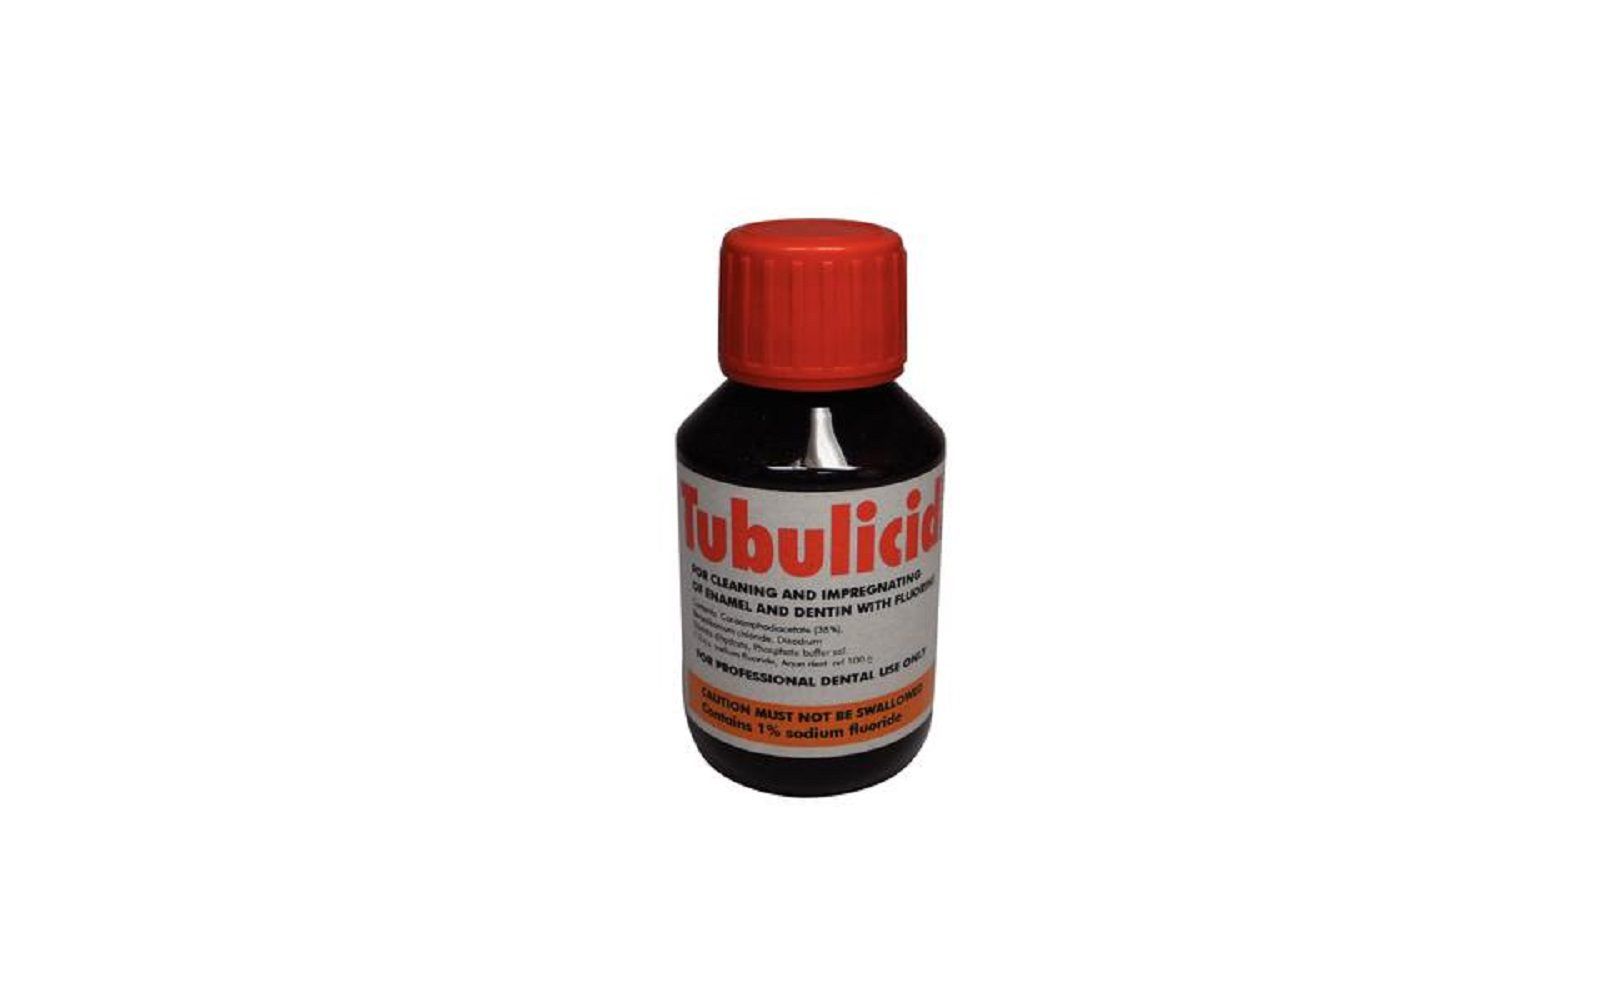 Tubulicid red label with fluoride, 100 ml